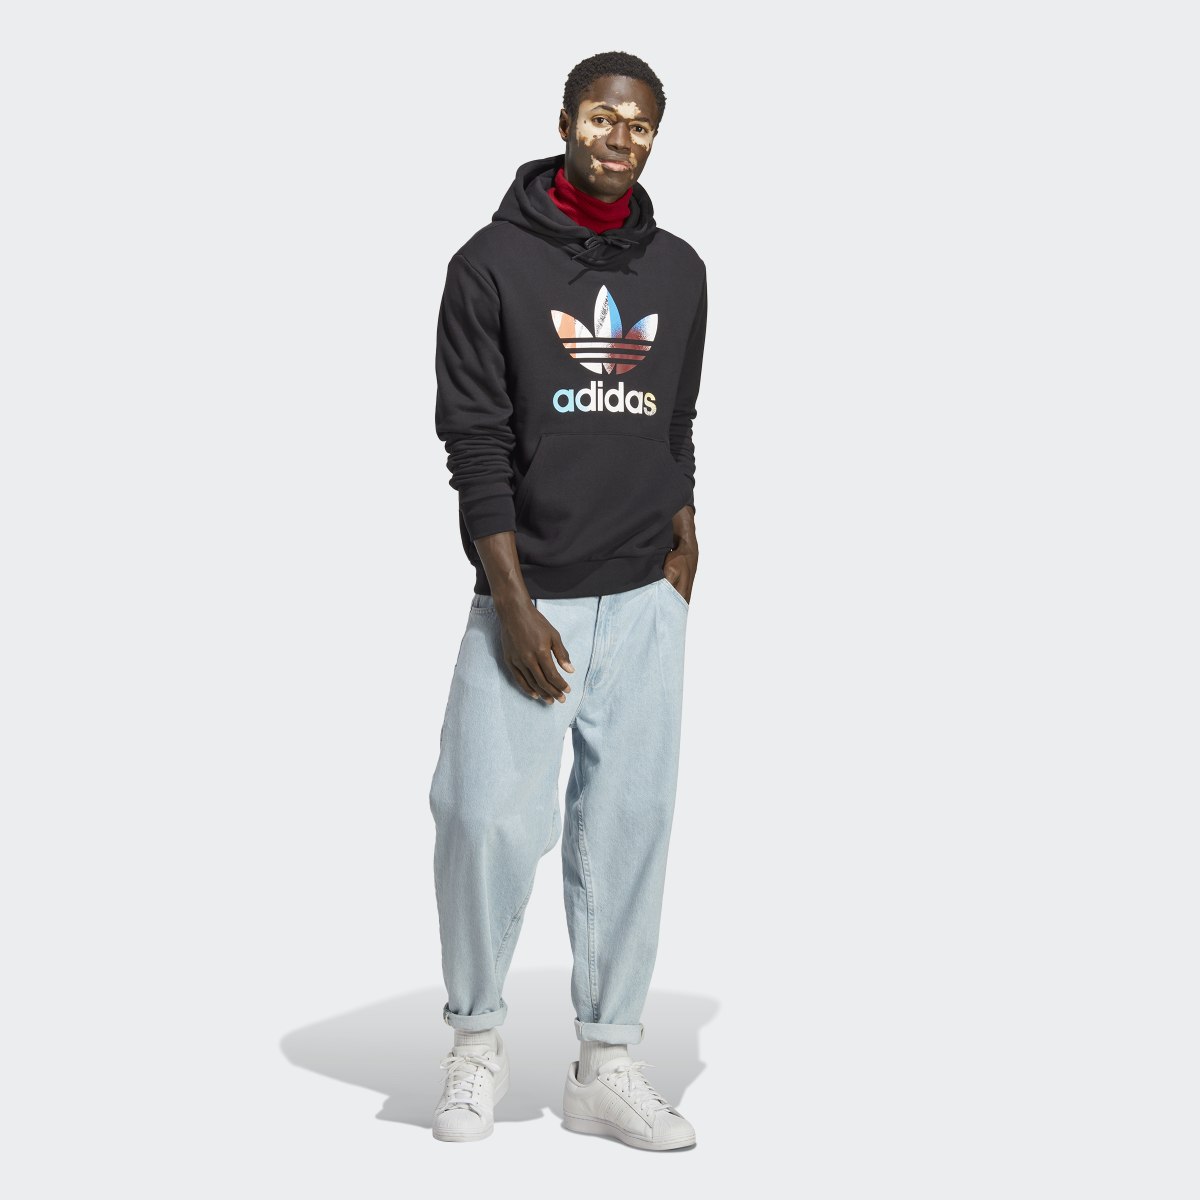 Adidas Graphics off the Grid Hoodie. 4